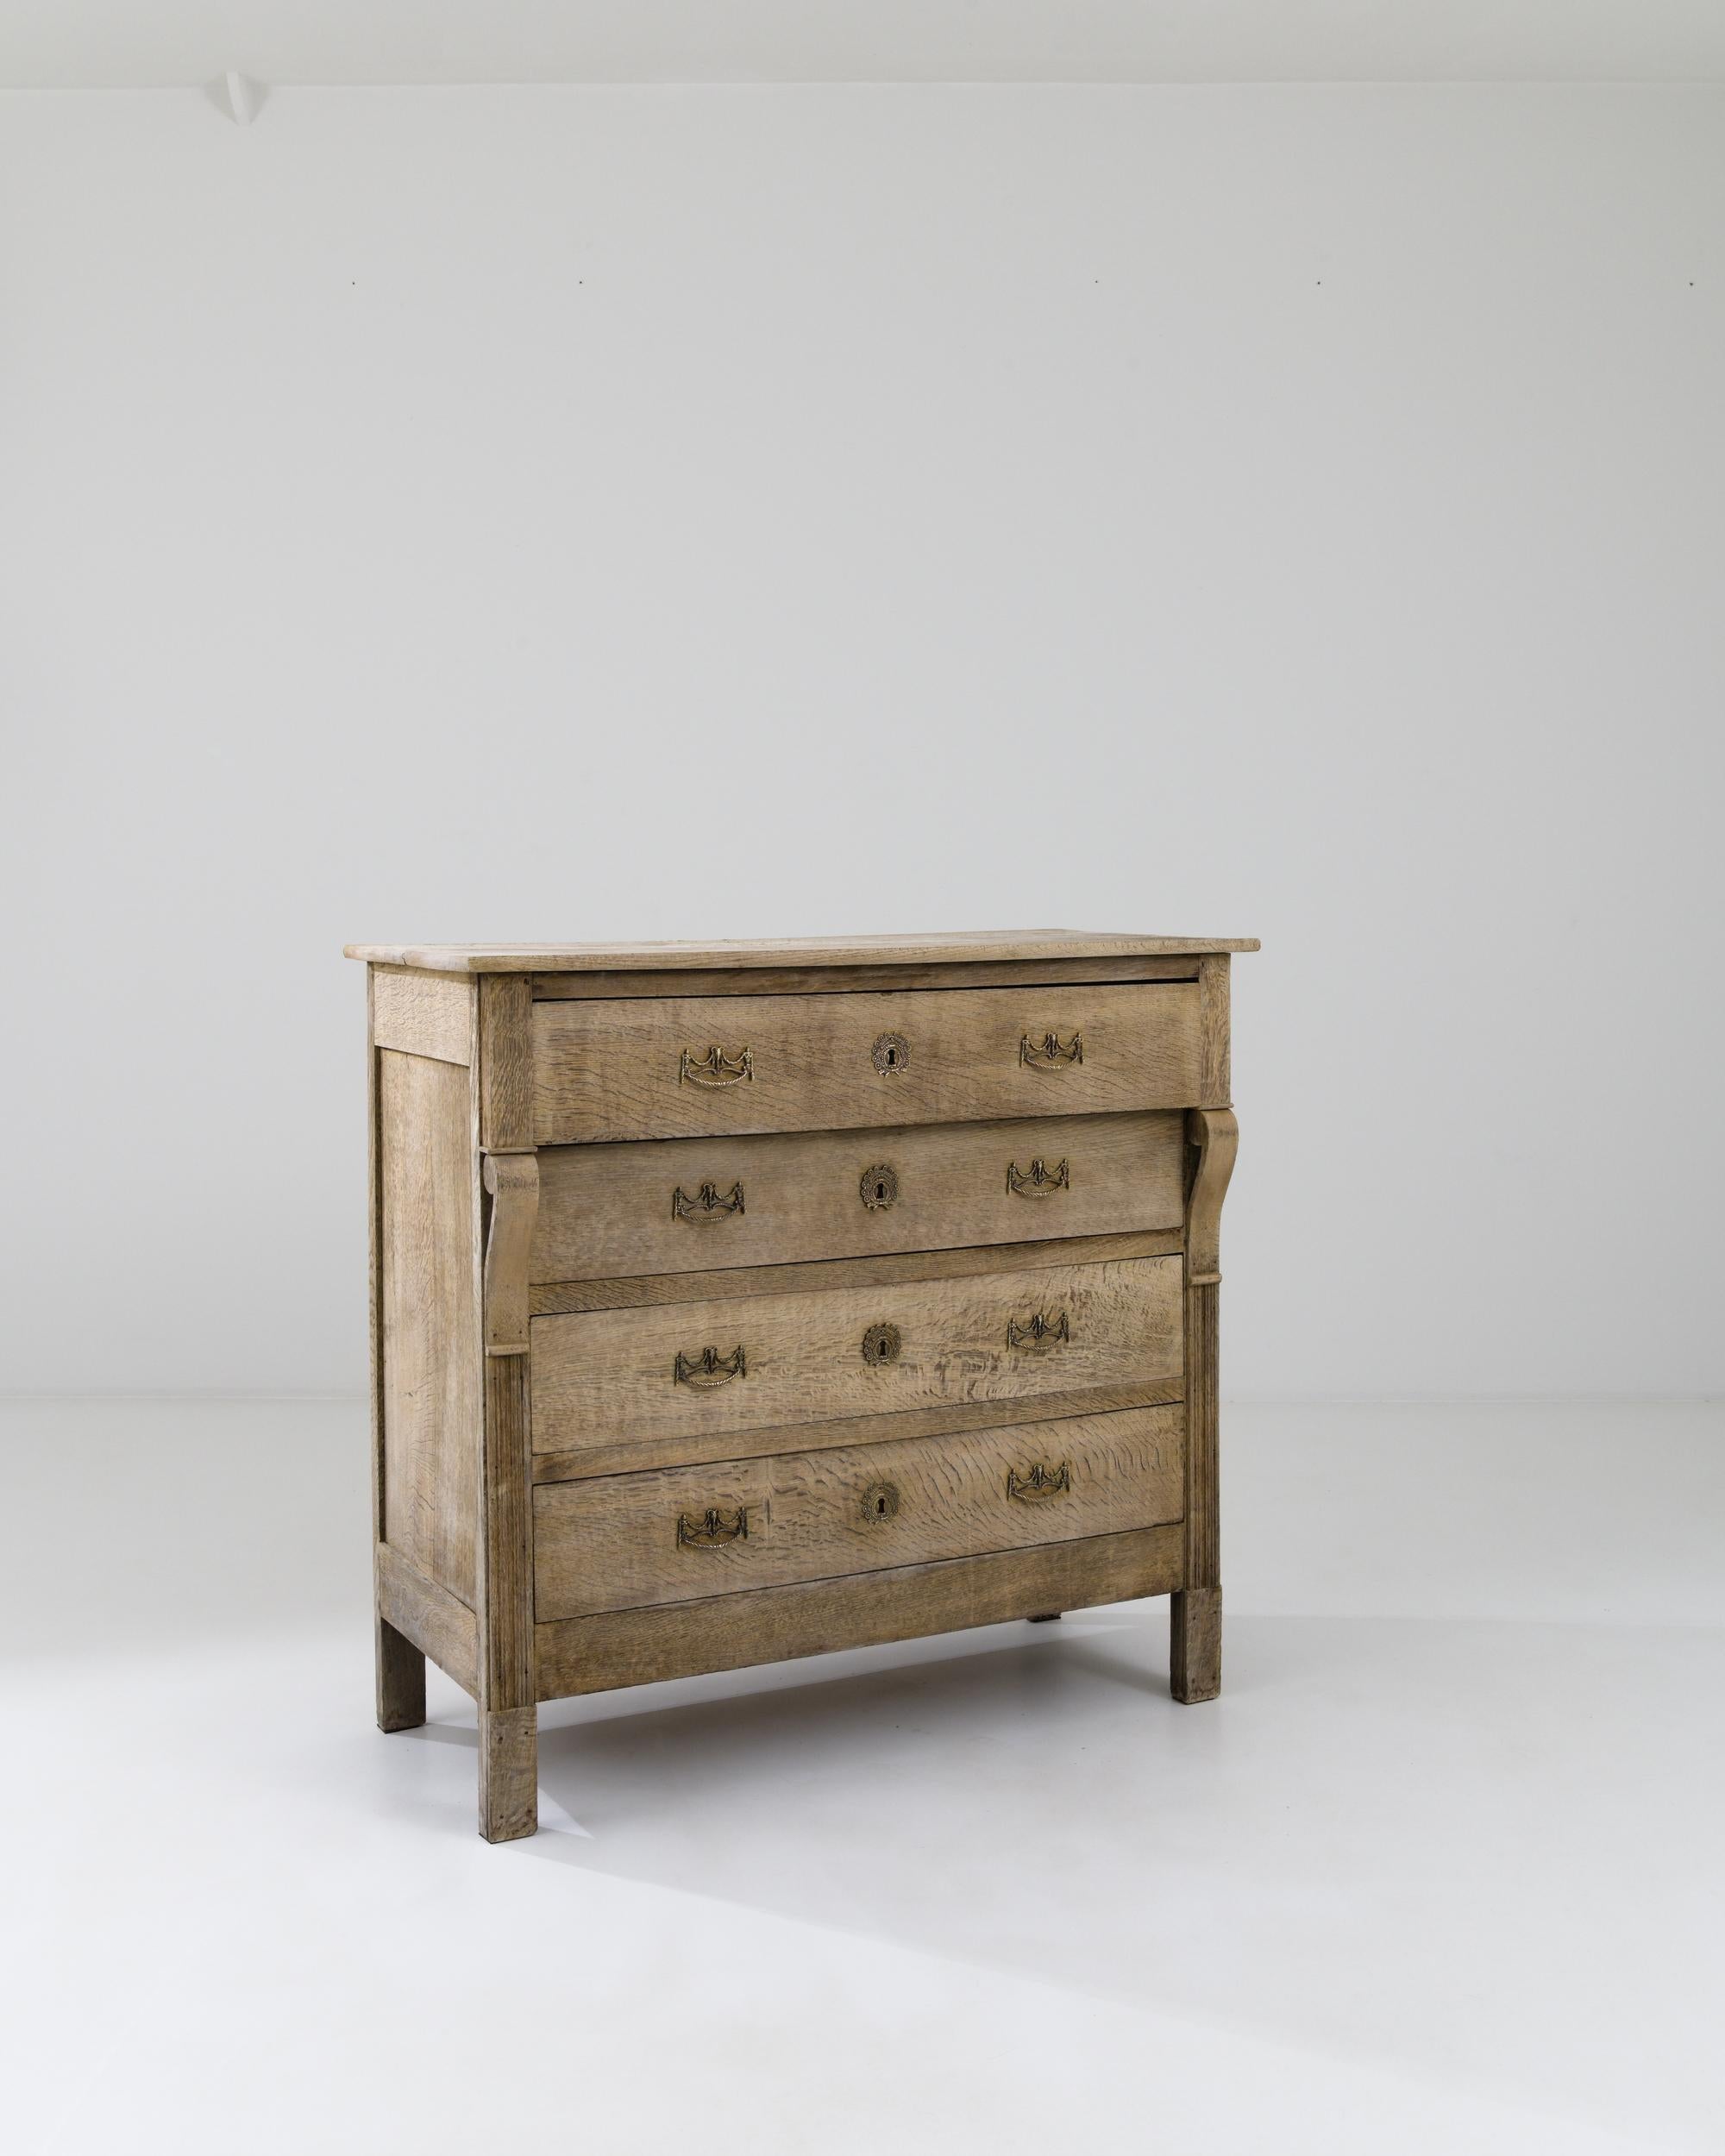 A wooden chest of drawers made in 1900s France. This handsome and astute dresser greets one with a pleasant demeanor, both dignified and approachable. The surface of the wood has been carefully restored through a bleaching process which both